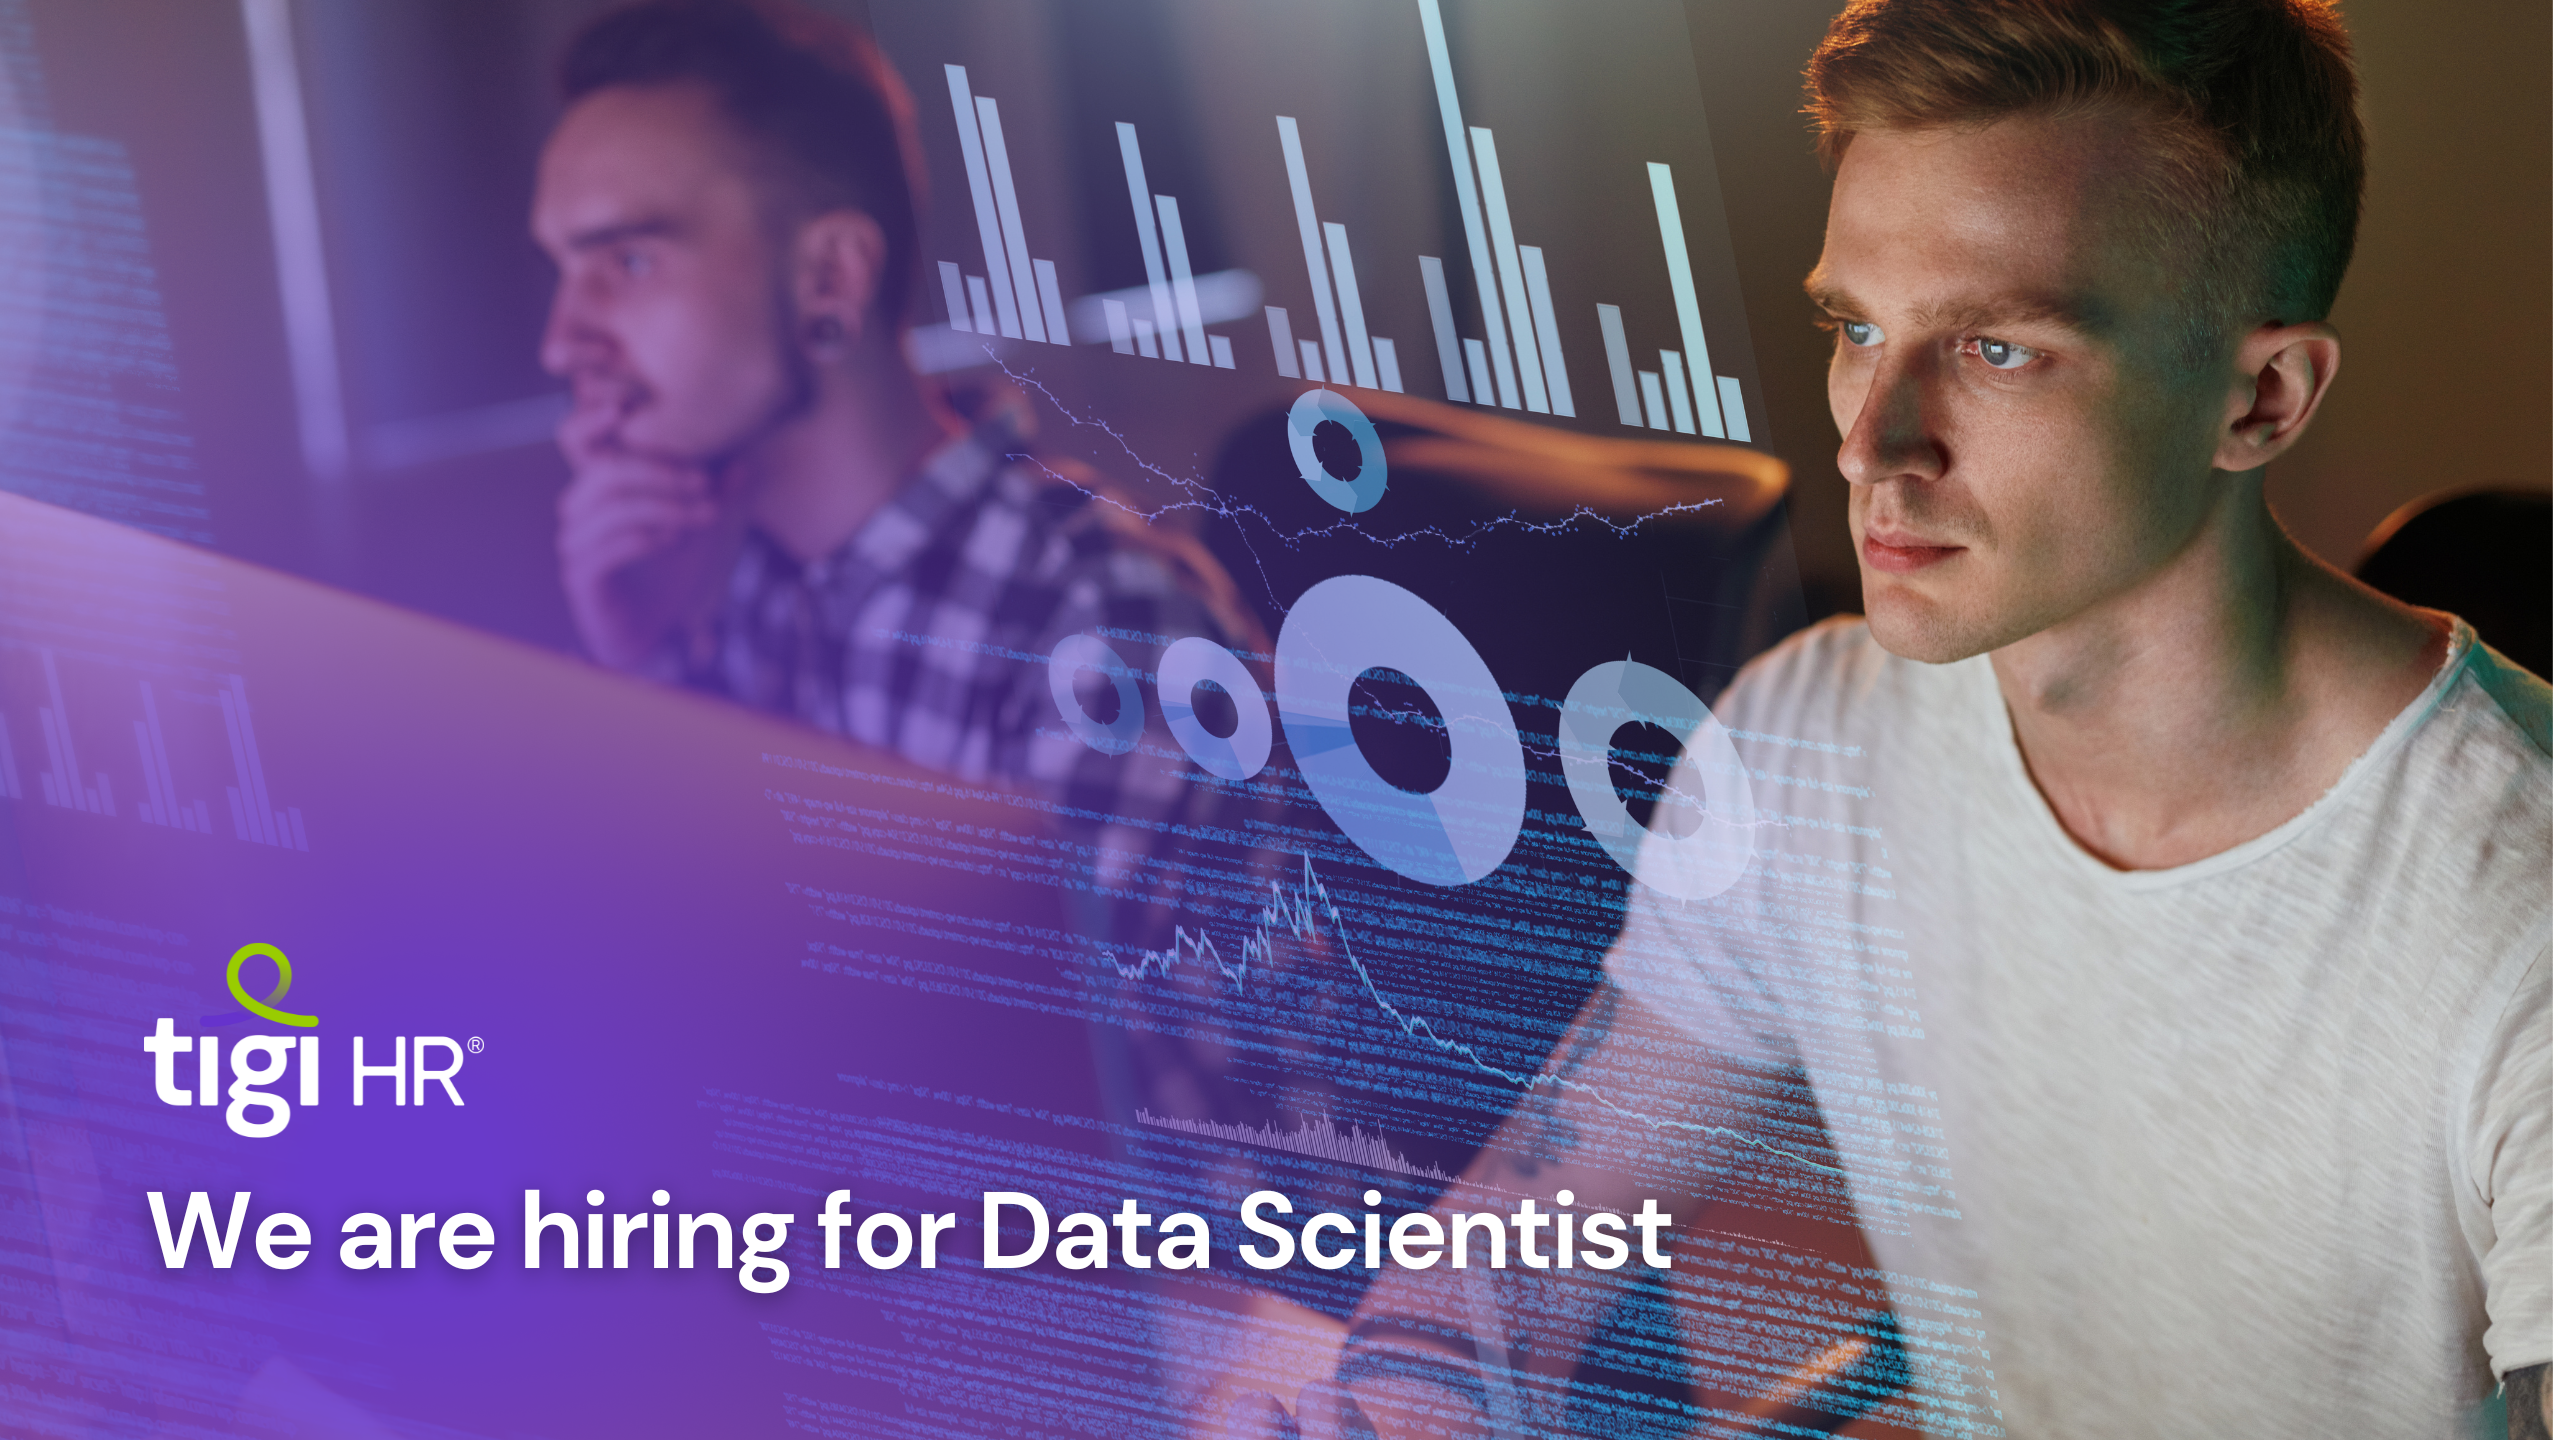 We are hiring for Data Scientist. Find jobs for Data Scientist.